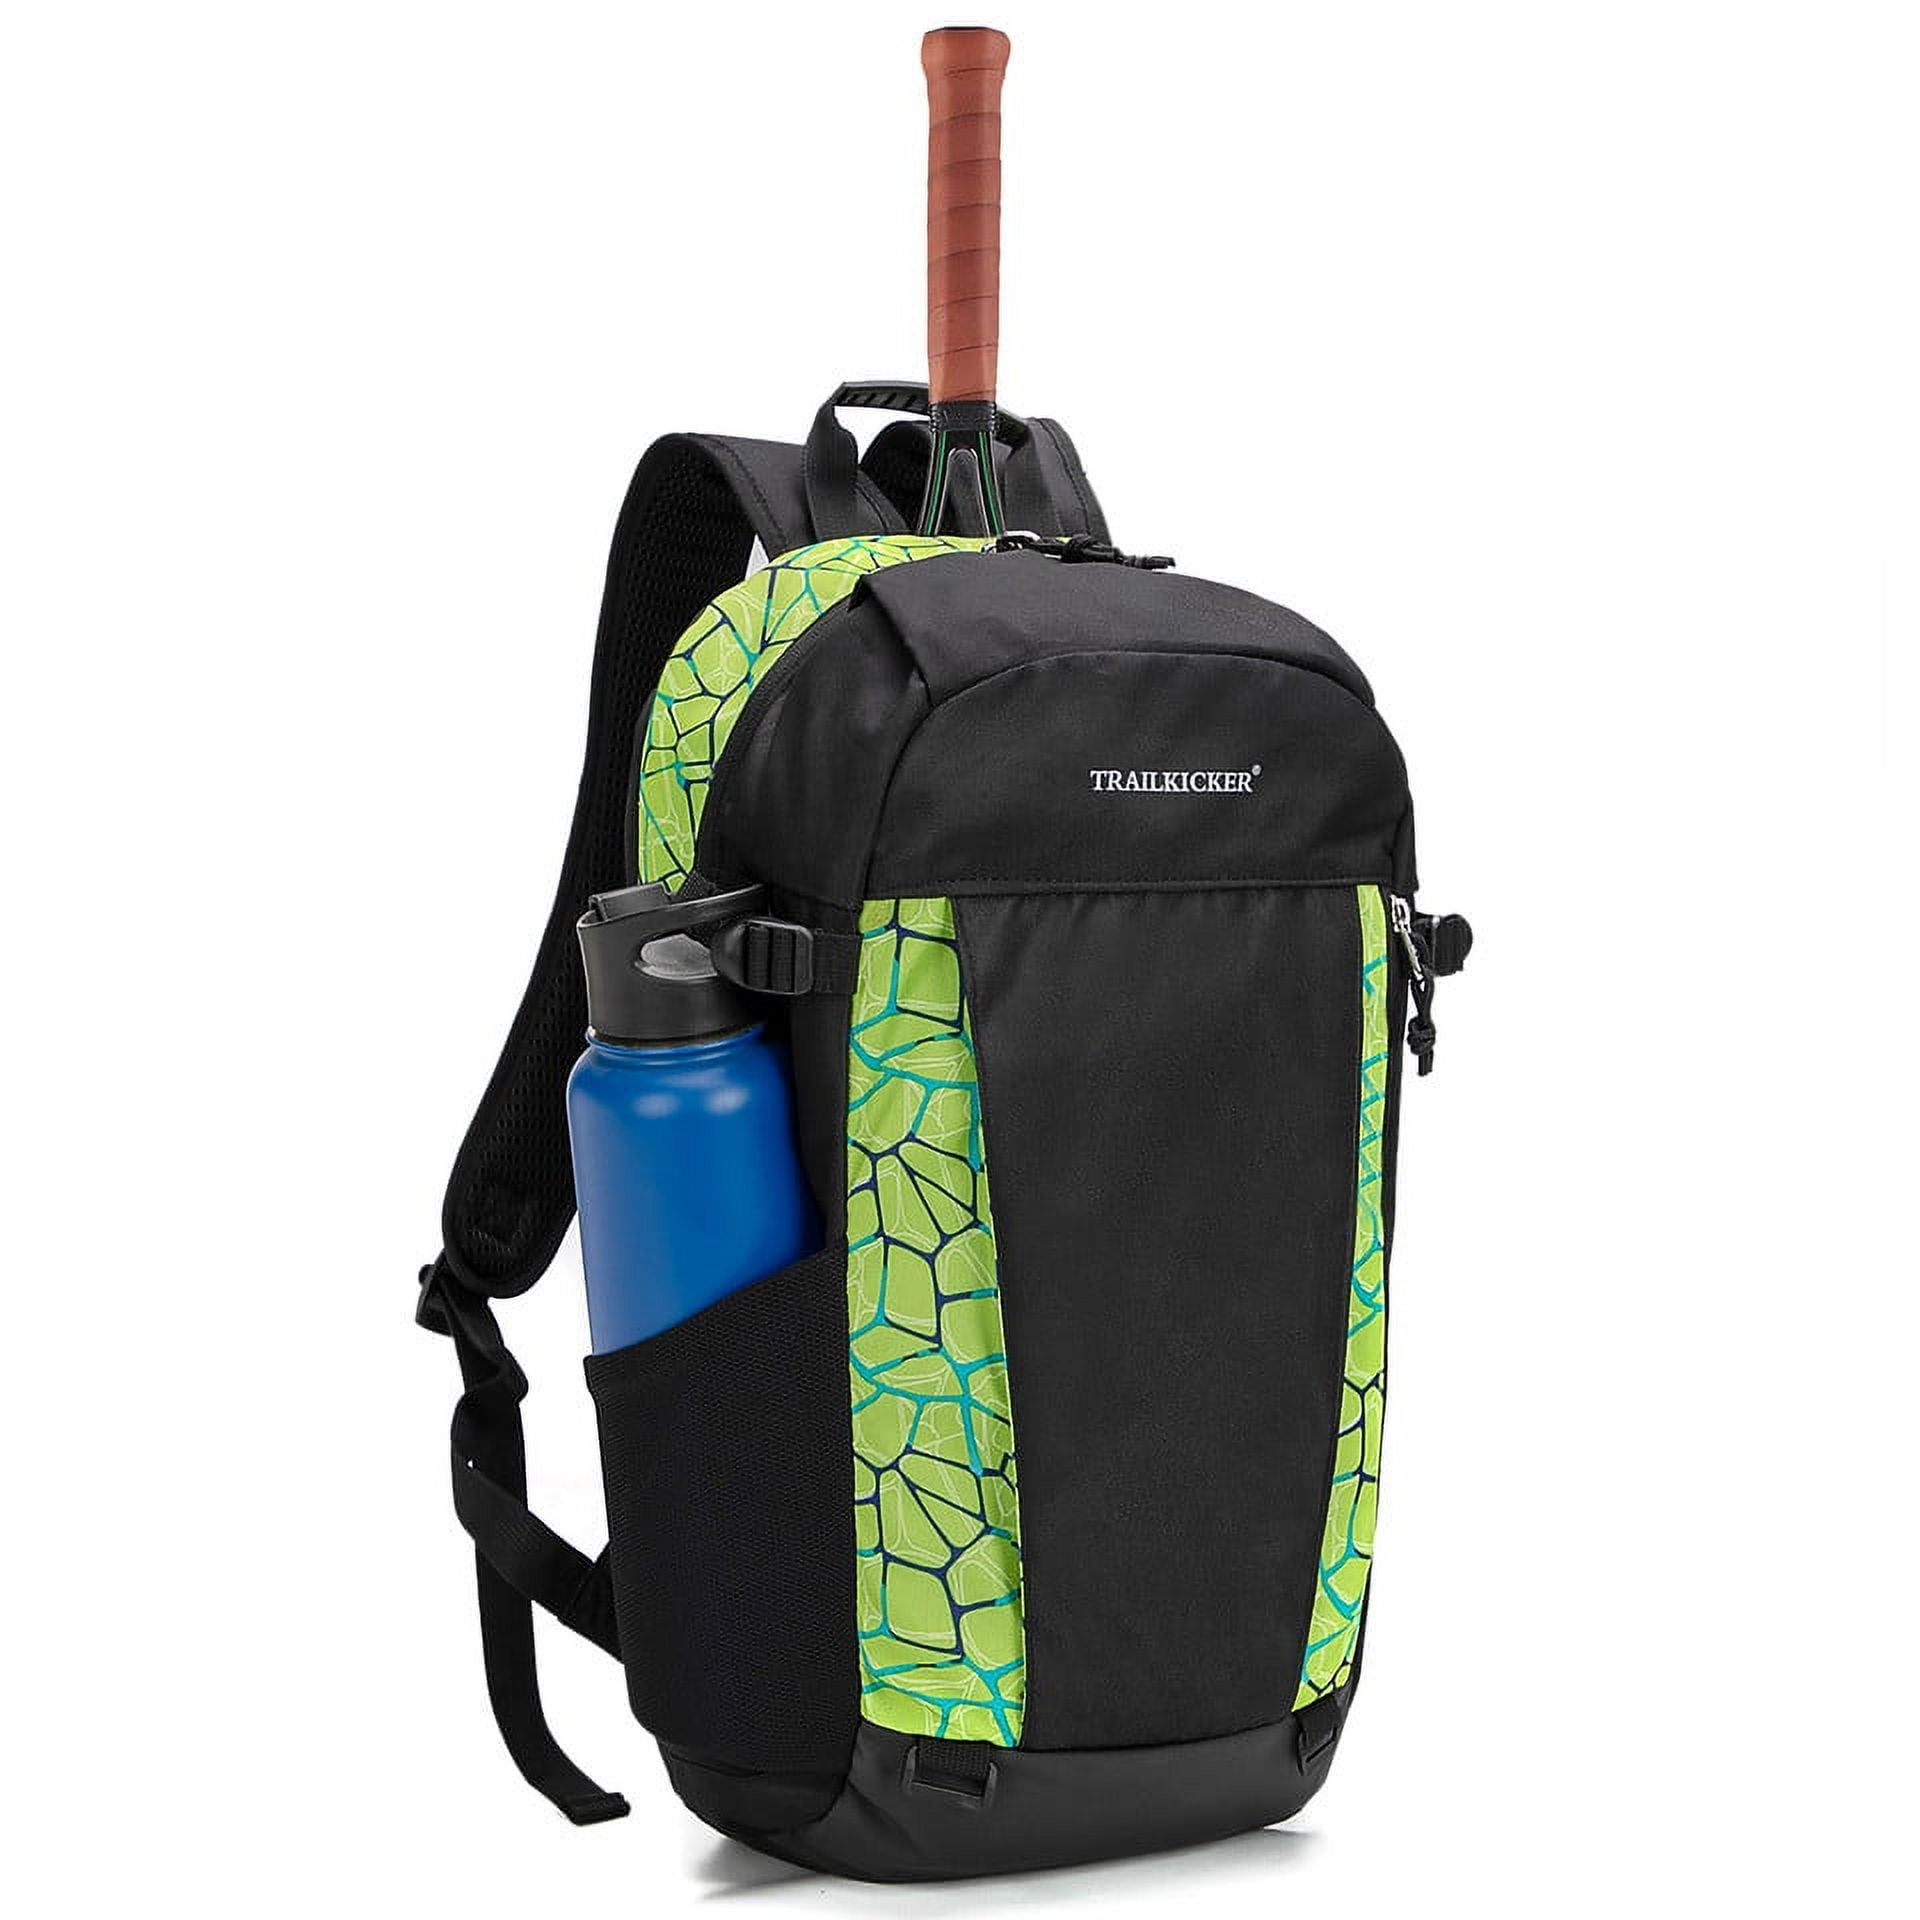 KALENJI Running Bag By Decathlon: Buy Online at Best Price on Snapdeal